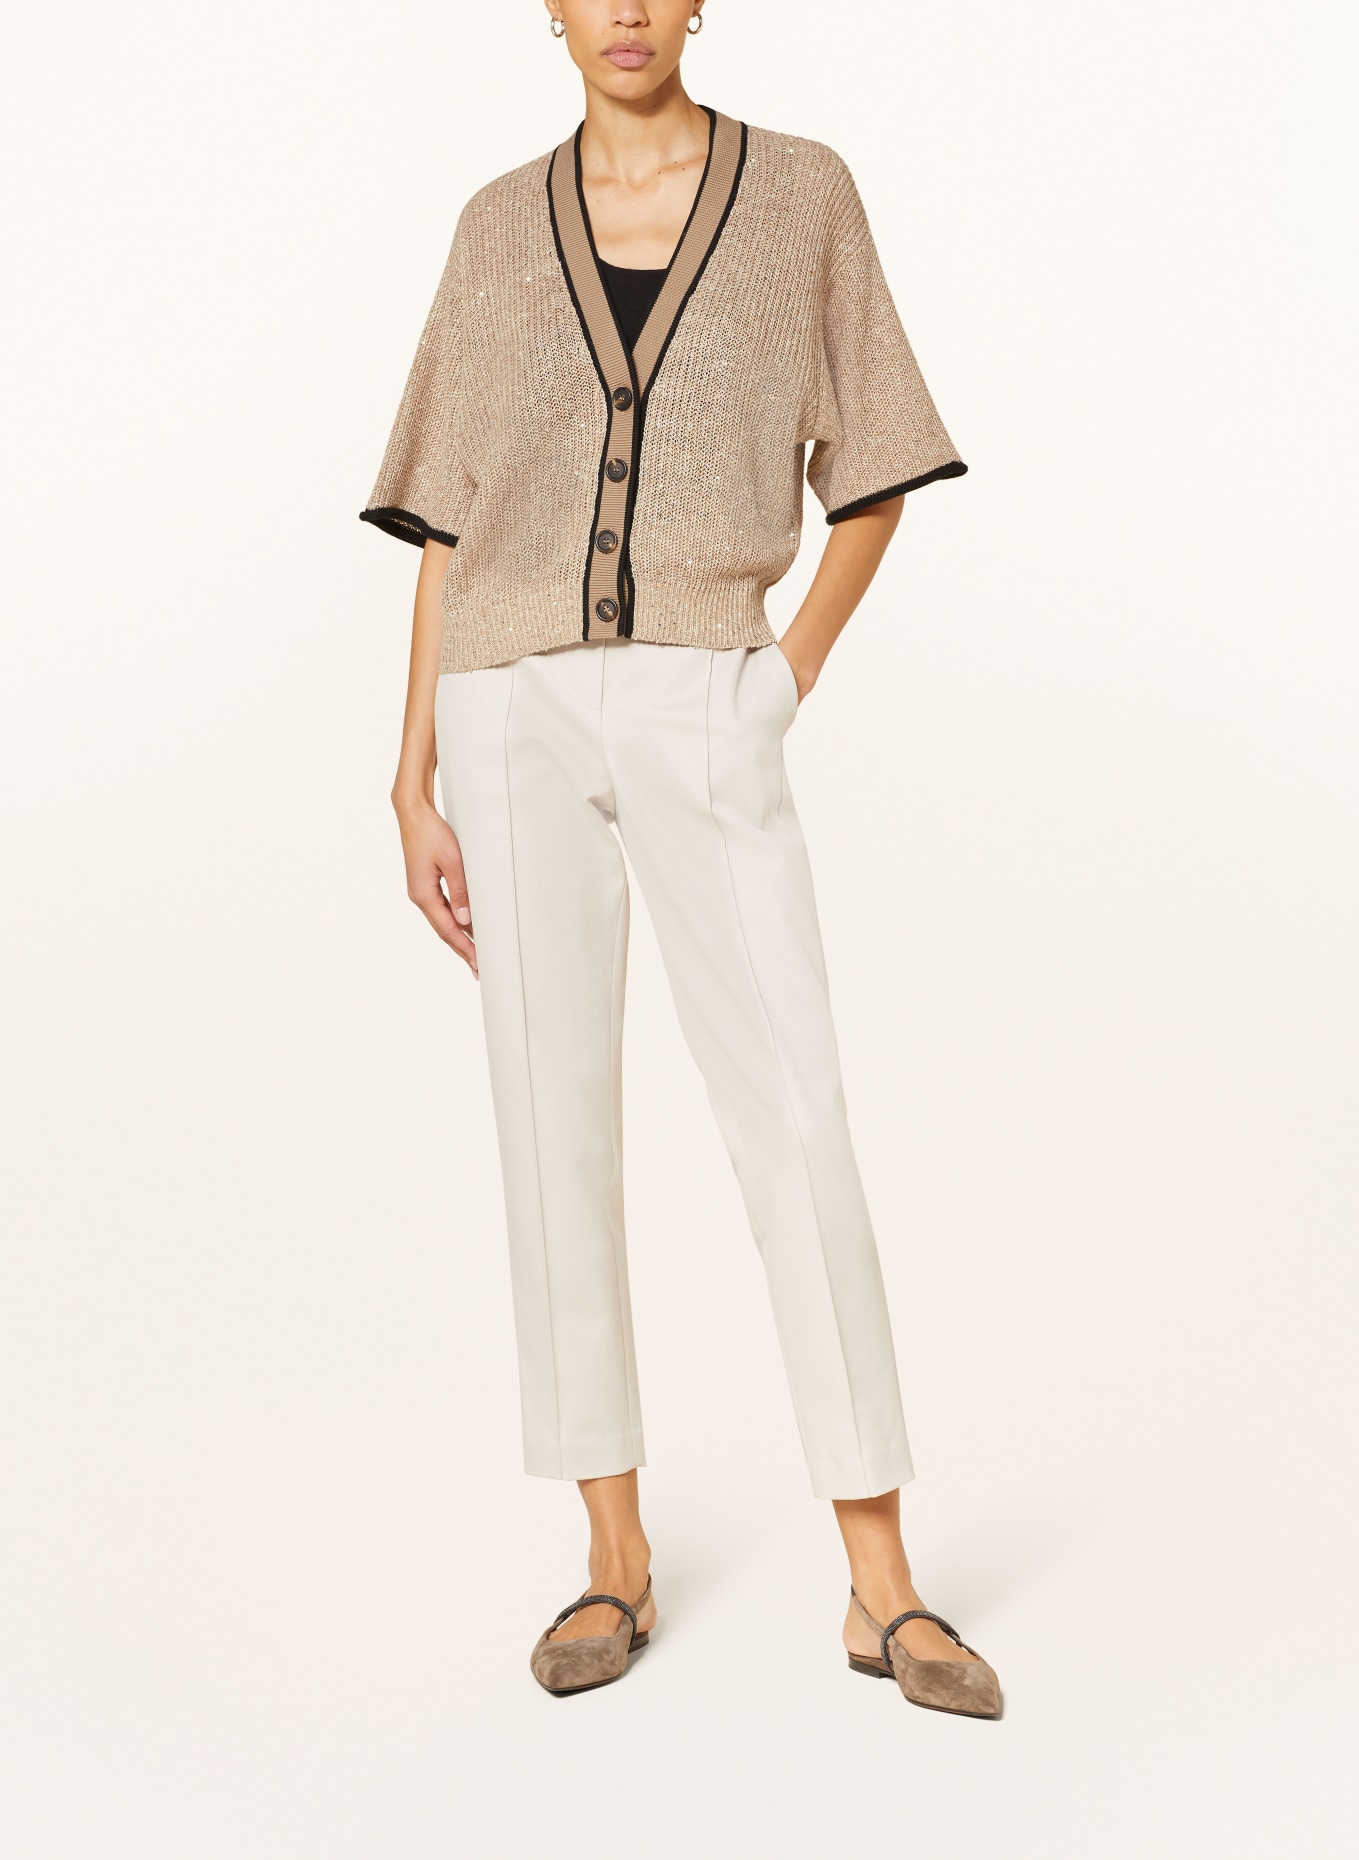 BRUNELLO CUCINELLI Cardigan made of linen with sequins, Color: CAMEL/ BLACK (Image 2)